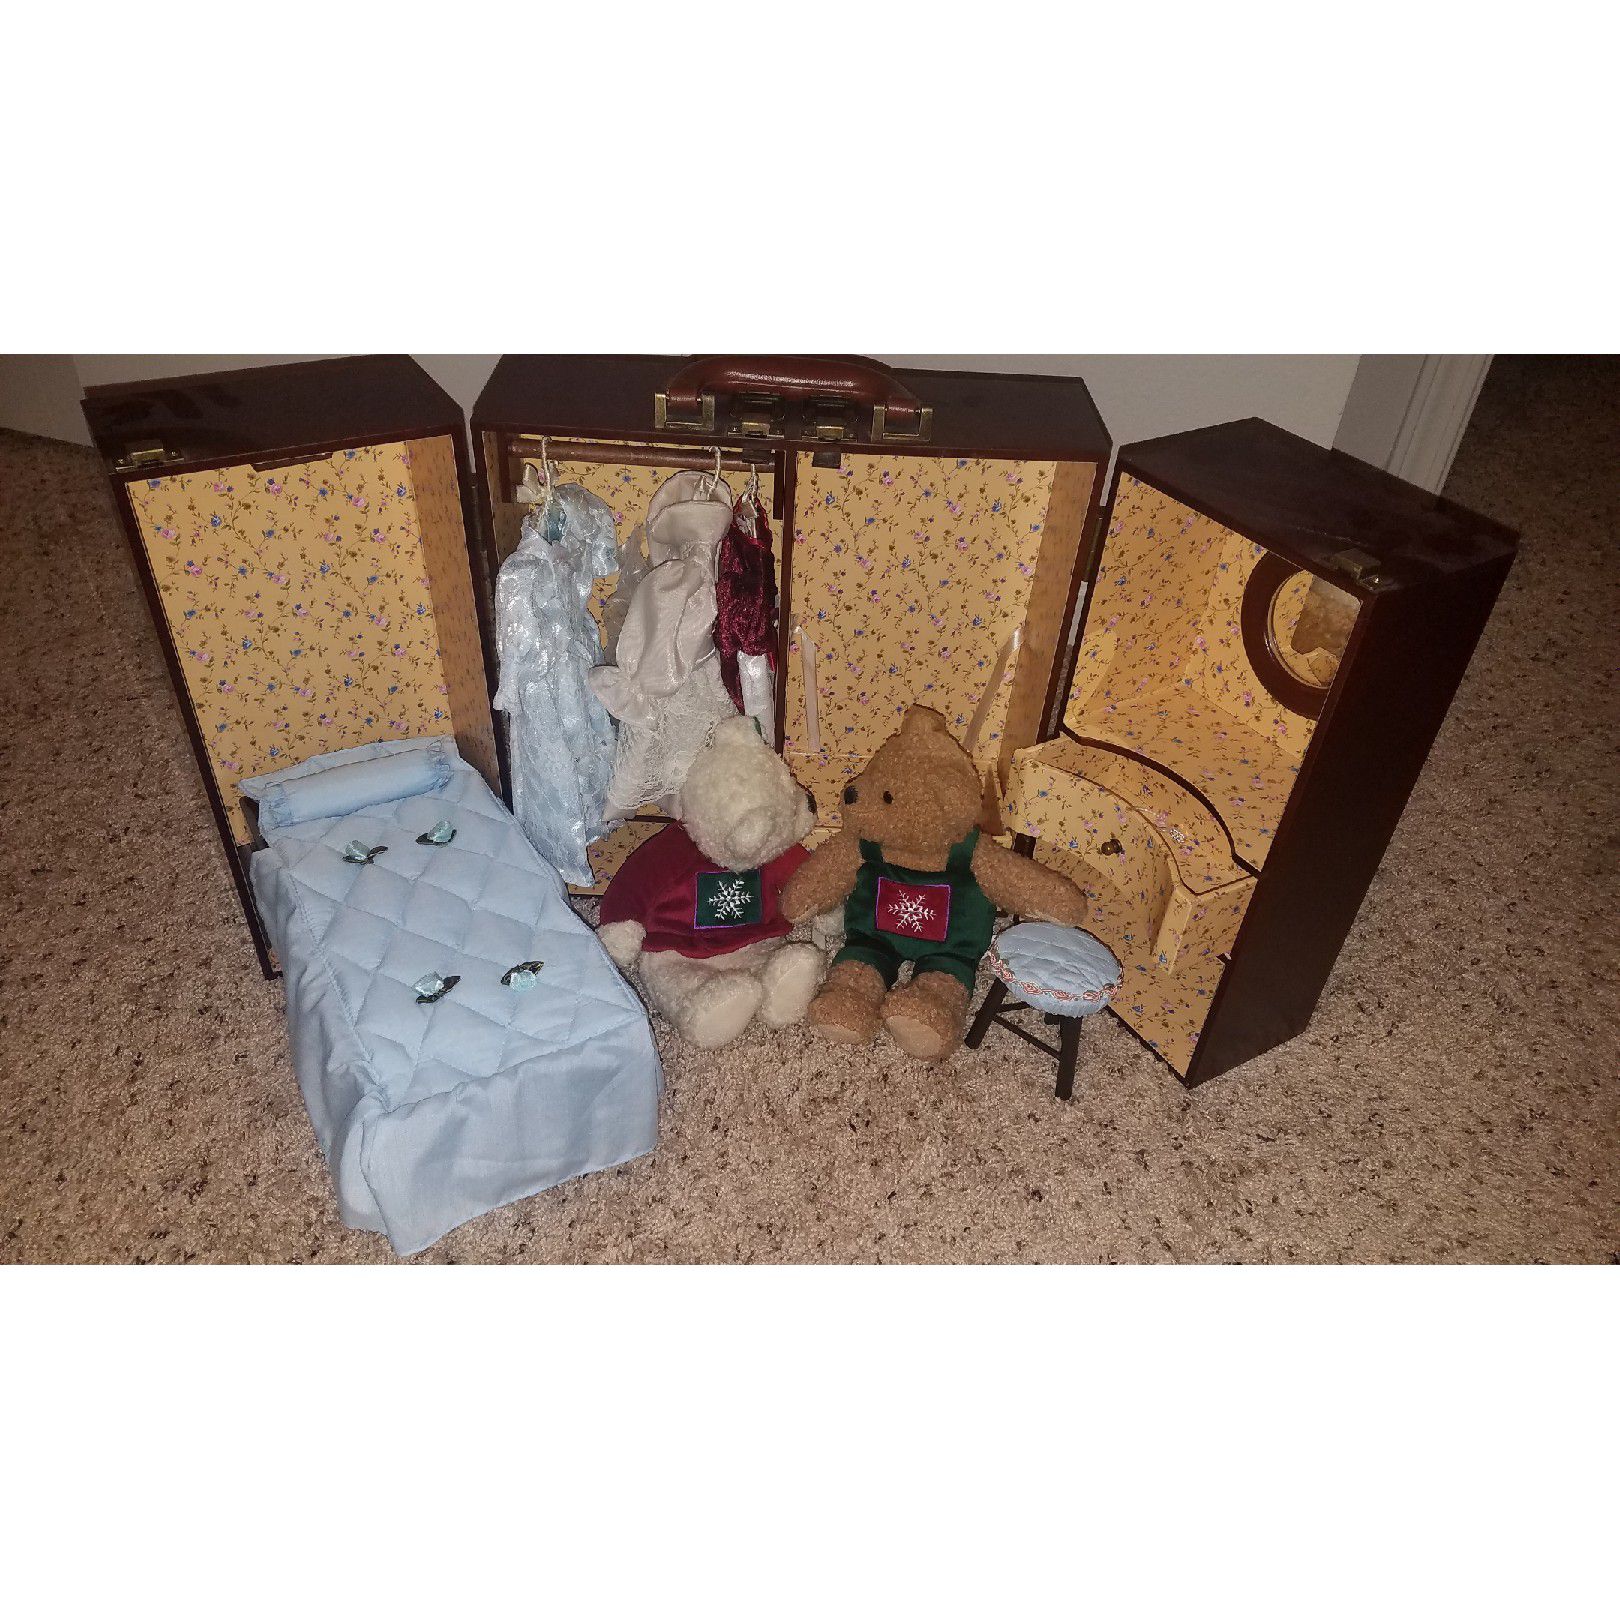 Vintage/ Antique doll house with classic handmade dresses